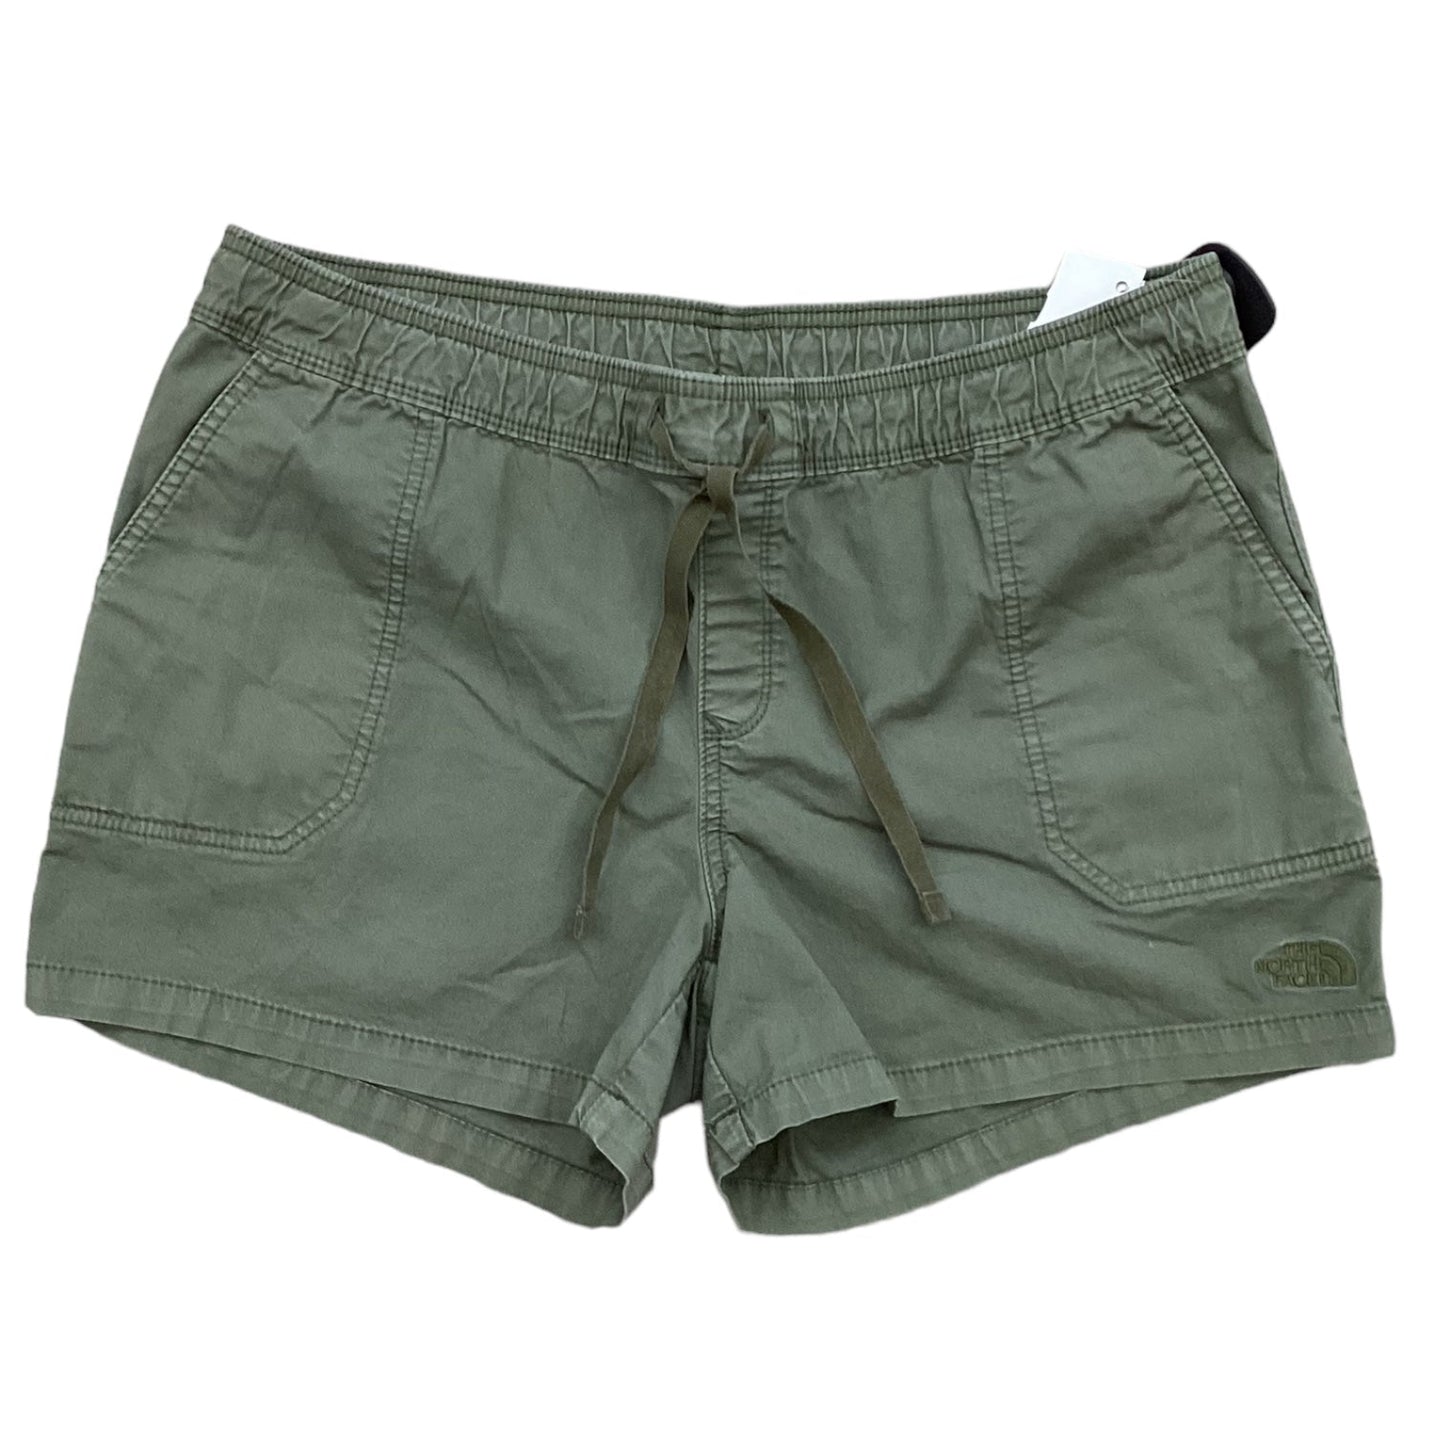 Green Shorts Designer The North Face, Size L